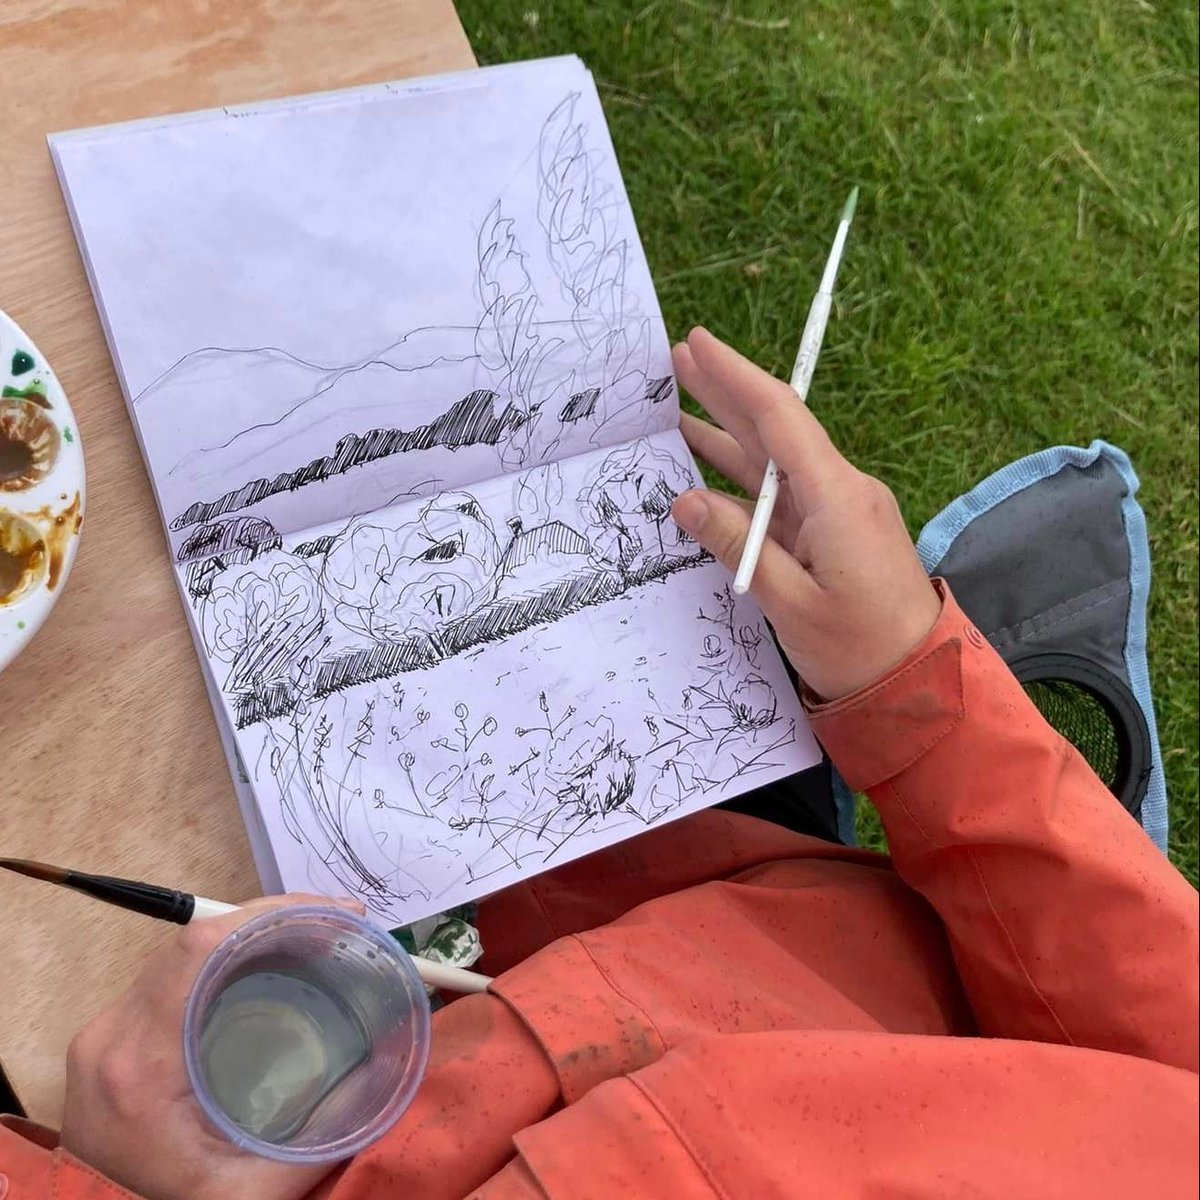 Drawing for Enjoyment with Frank Hayes 27 Apr / 18 May, 2-4pm We're delighted to welcome Frank Hayes to lead two inclusive and supportive drawing workshops at CAMPLE LINE this Spring 🌼 🎟️ Book via link in bio All welcome, no previous experience required All materials provided